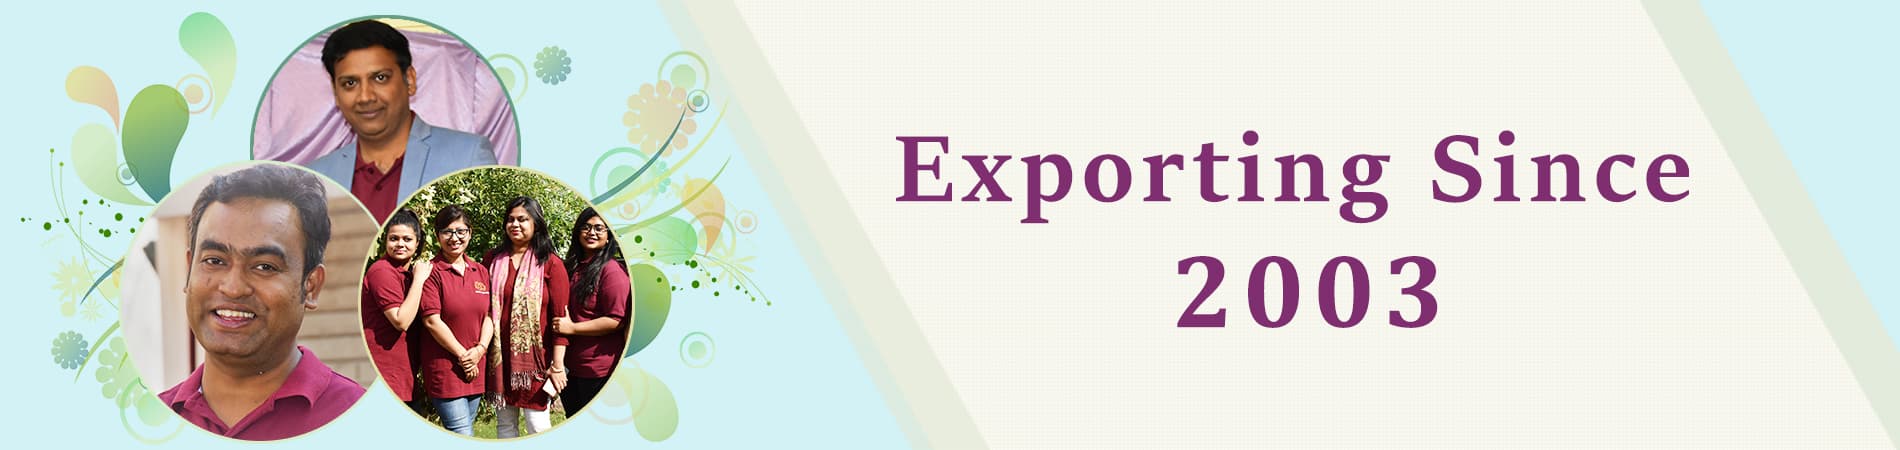 1586922199_About_Us_Exporting_Since_2003.jpg